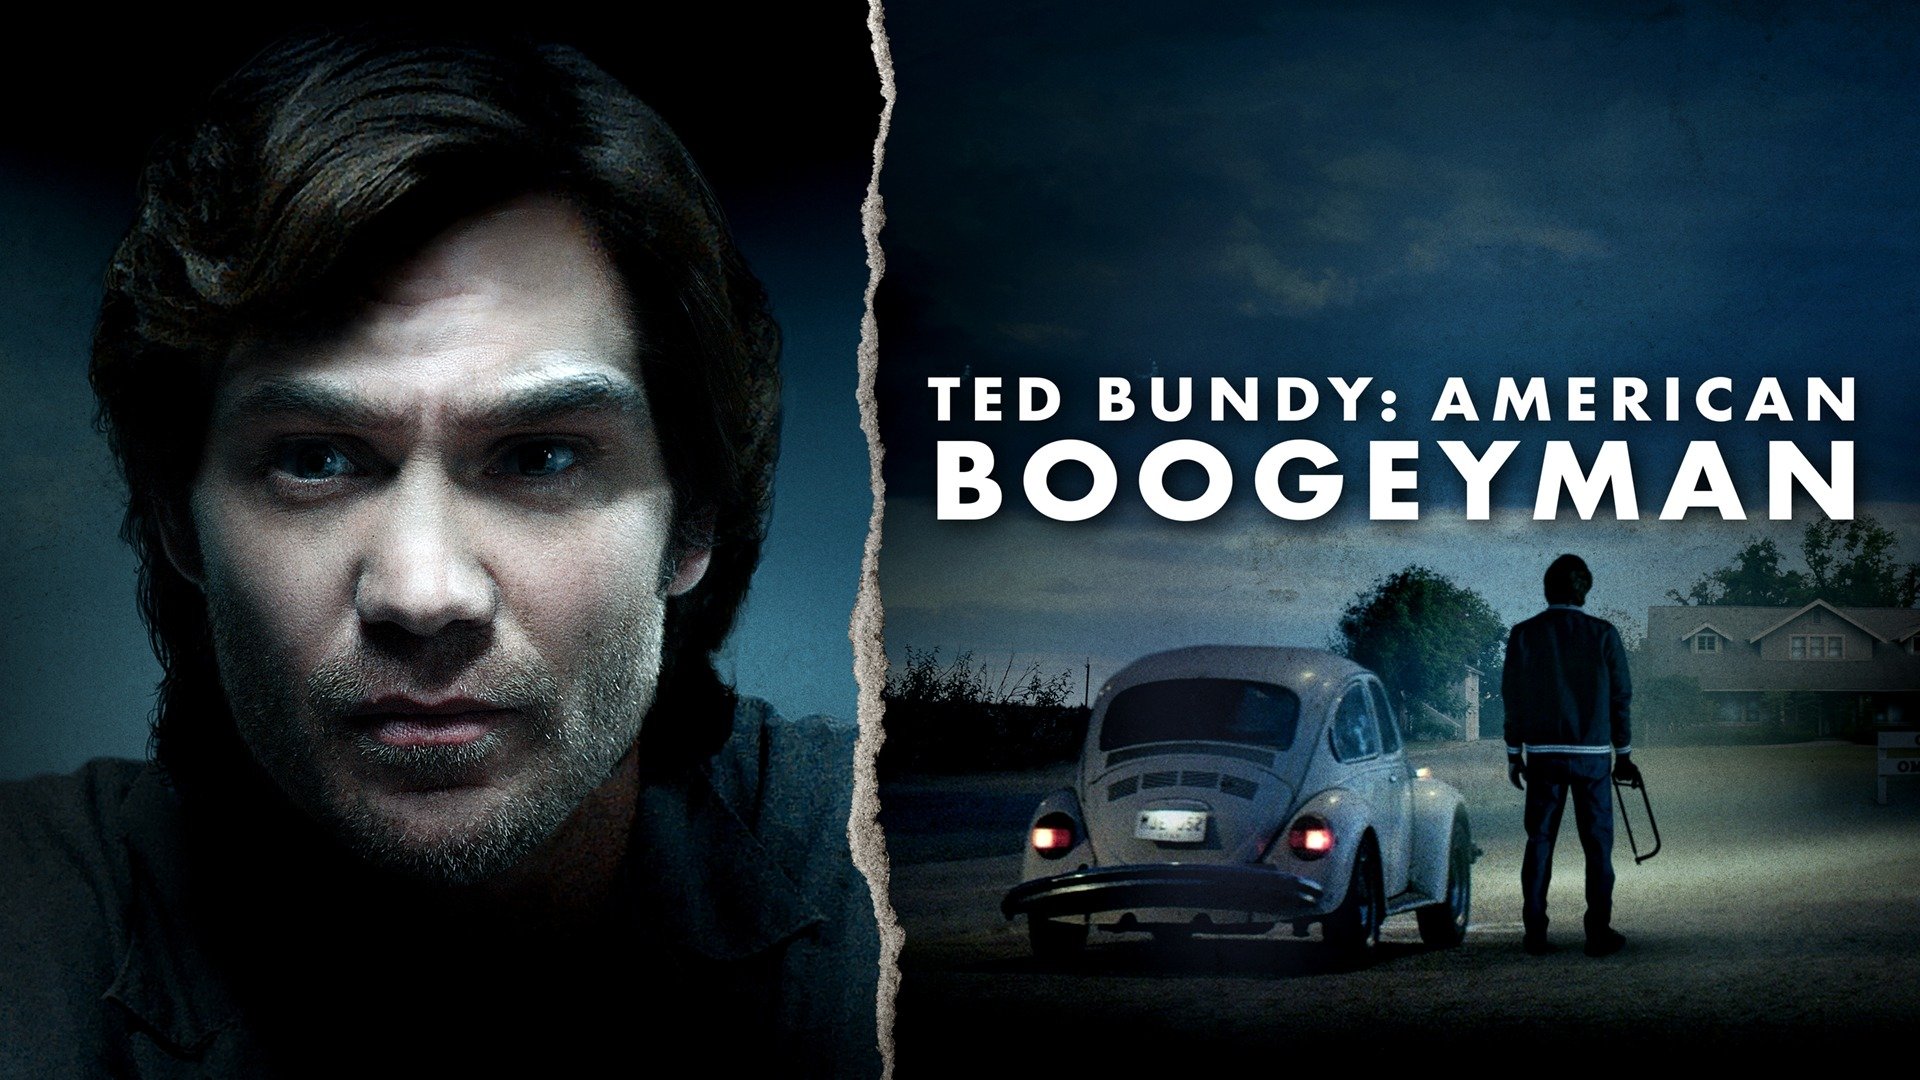 Ted Bundy American Boogeyman Trailer 1 Trailers And Videos Rotten Tomatoes 2981